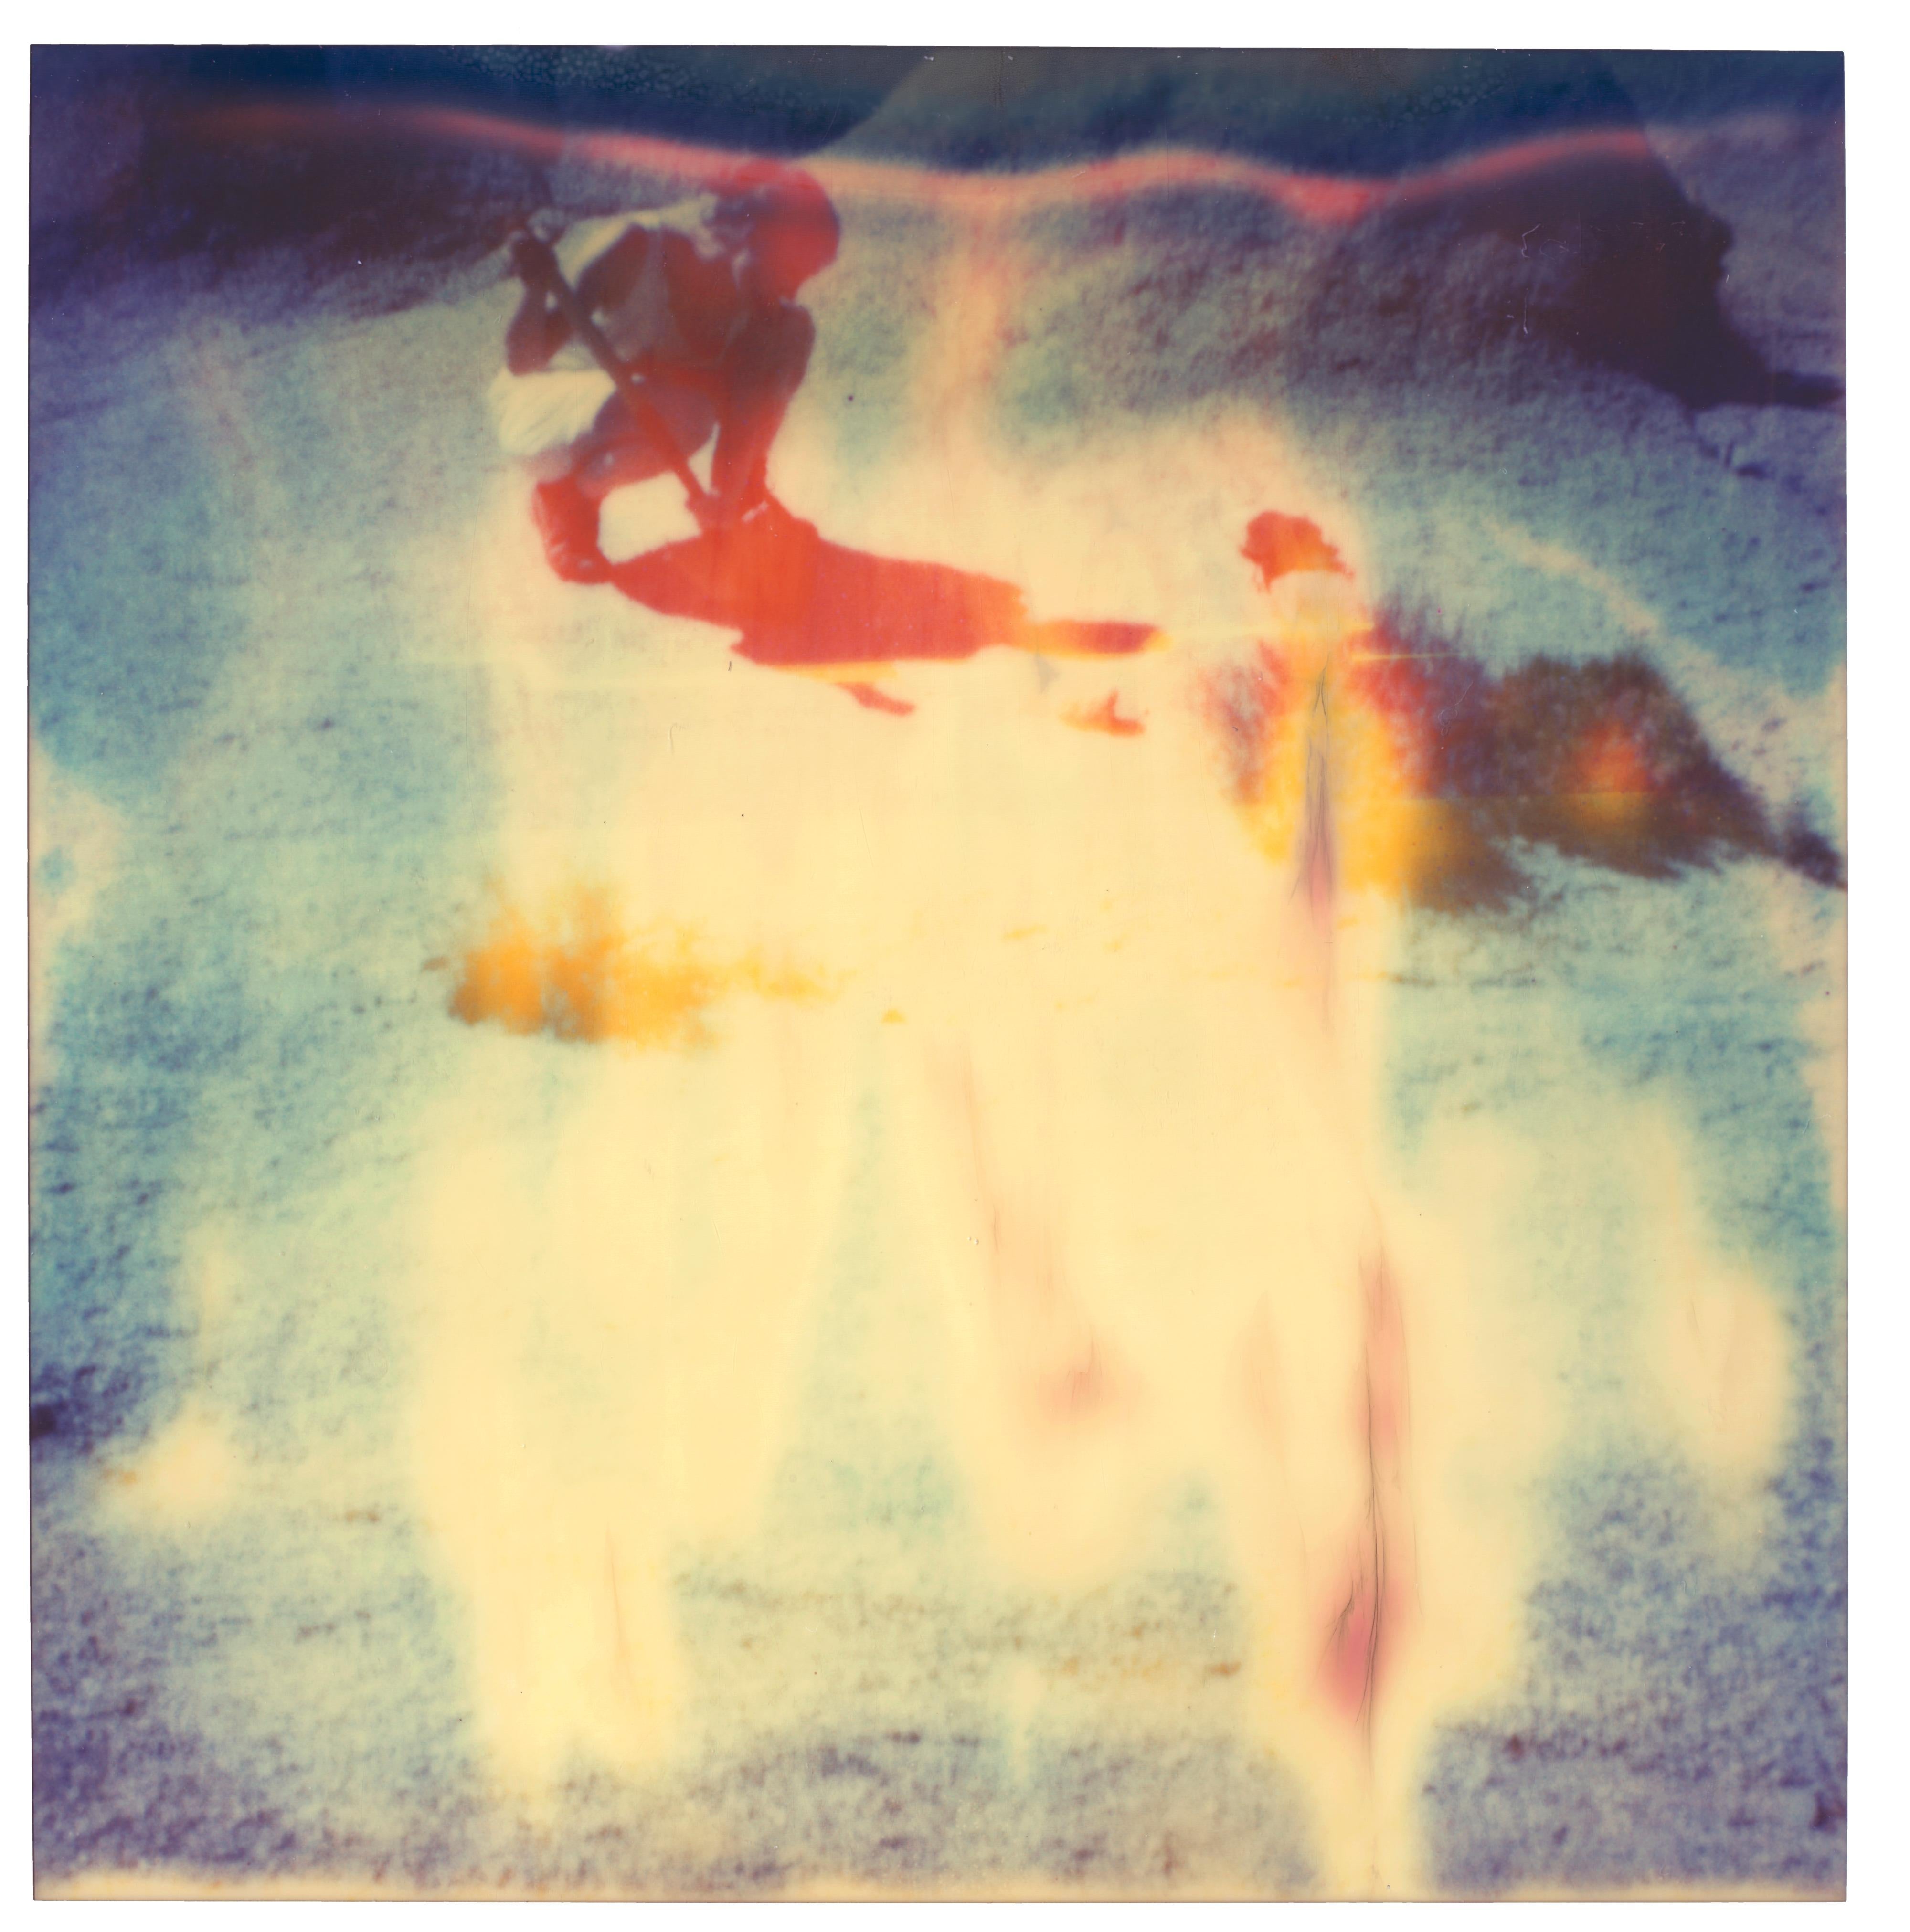 Buried - 8 pieces - Contemporary, Figurative, expired, Polaroid, analog For Sale 5